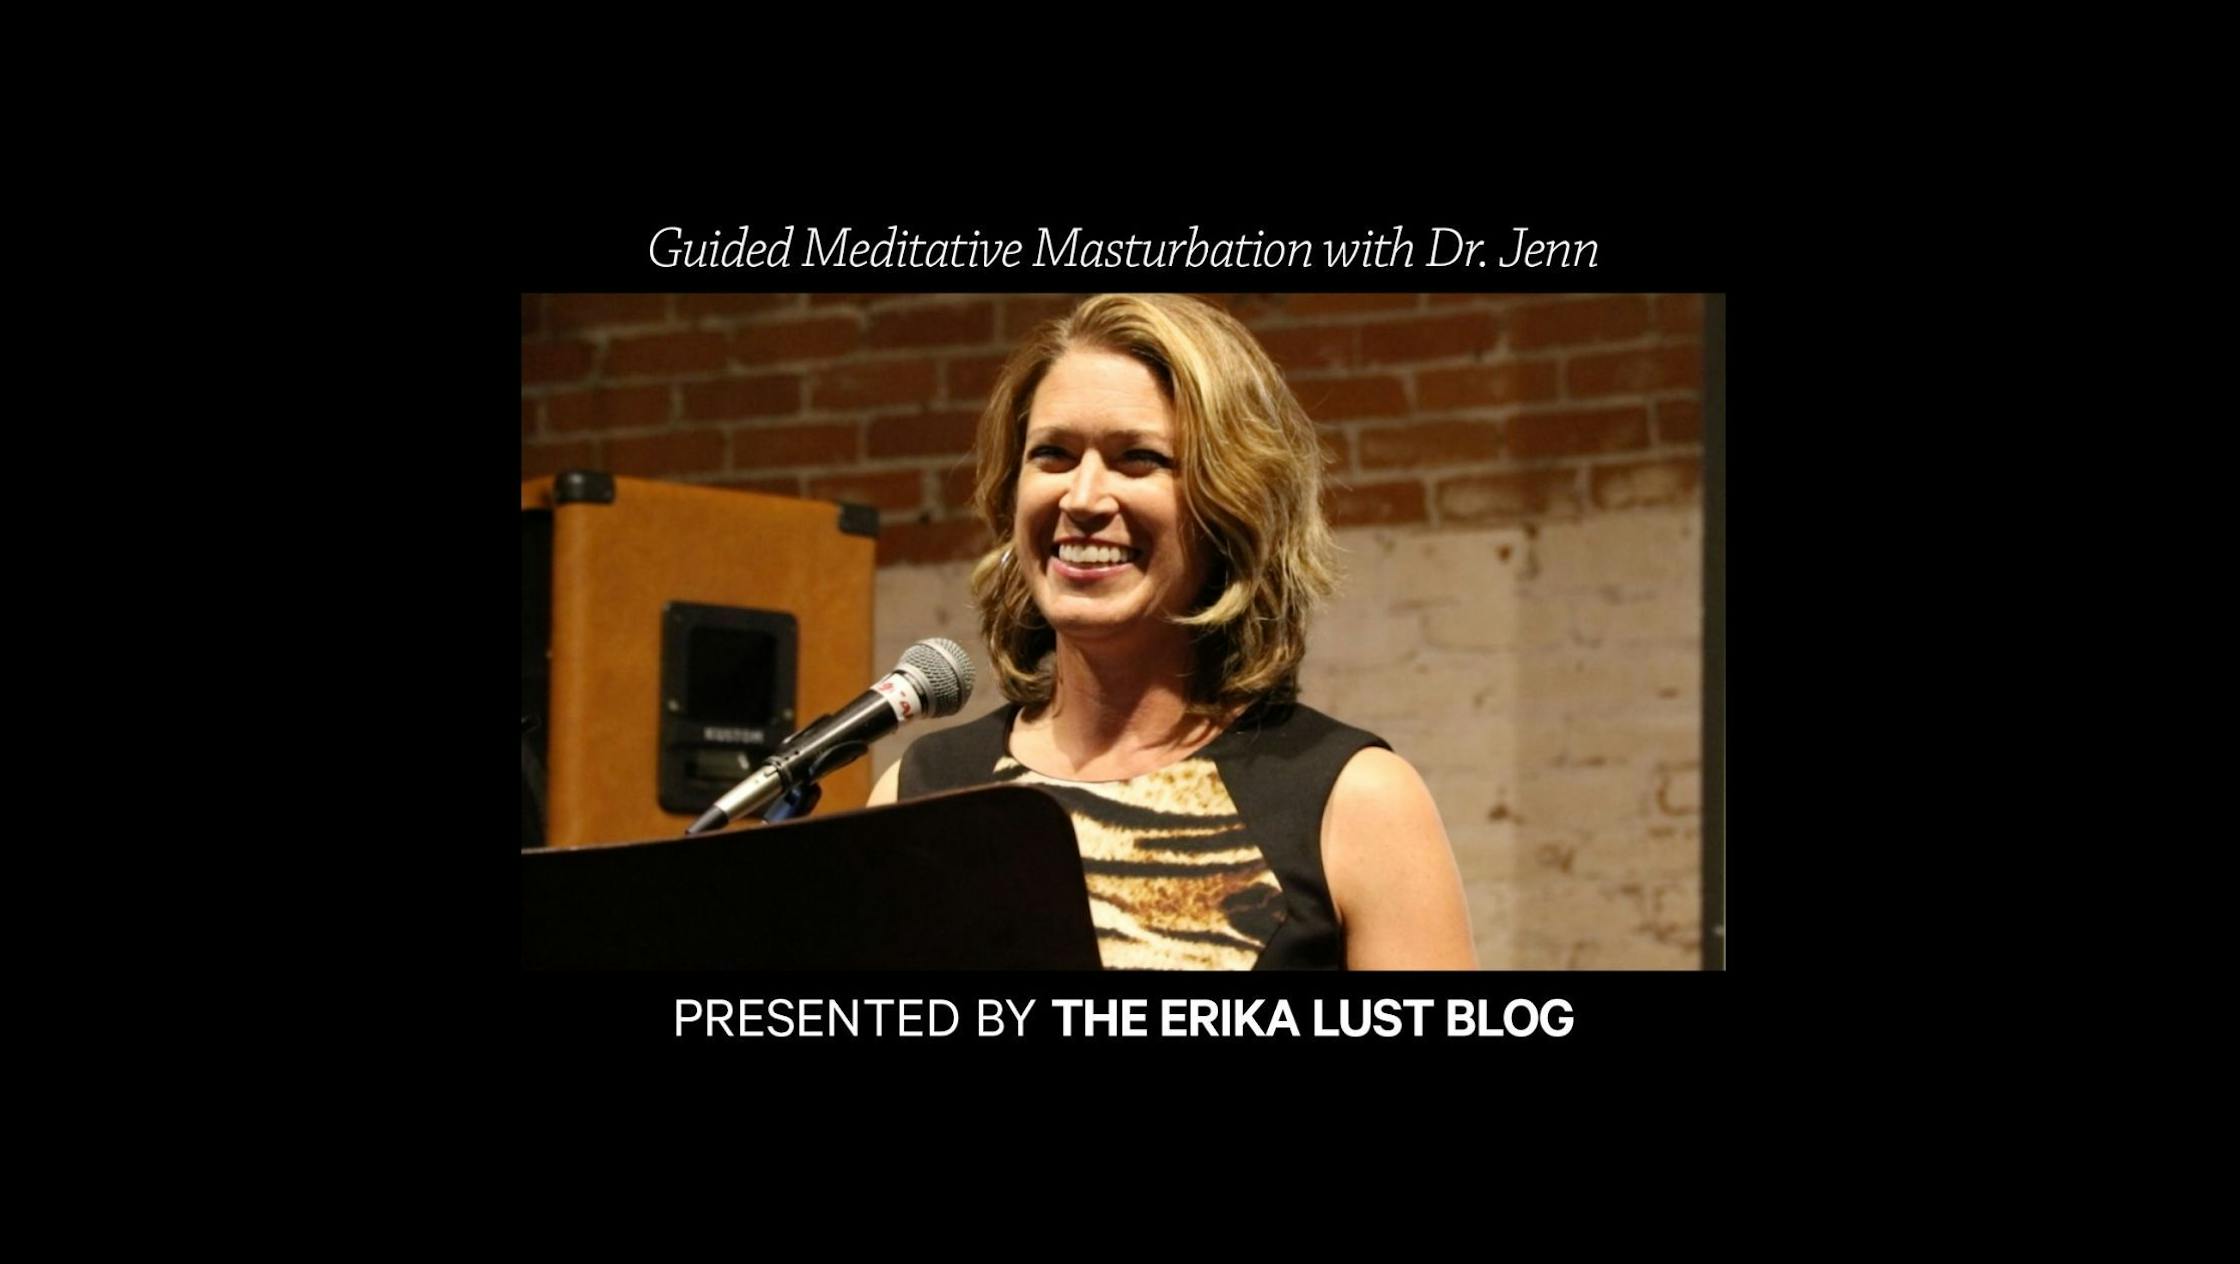 Article header video: Watch: Guided Meditative Masturbation Session with Dr. Jenn